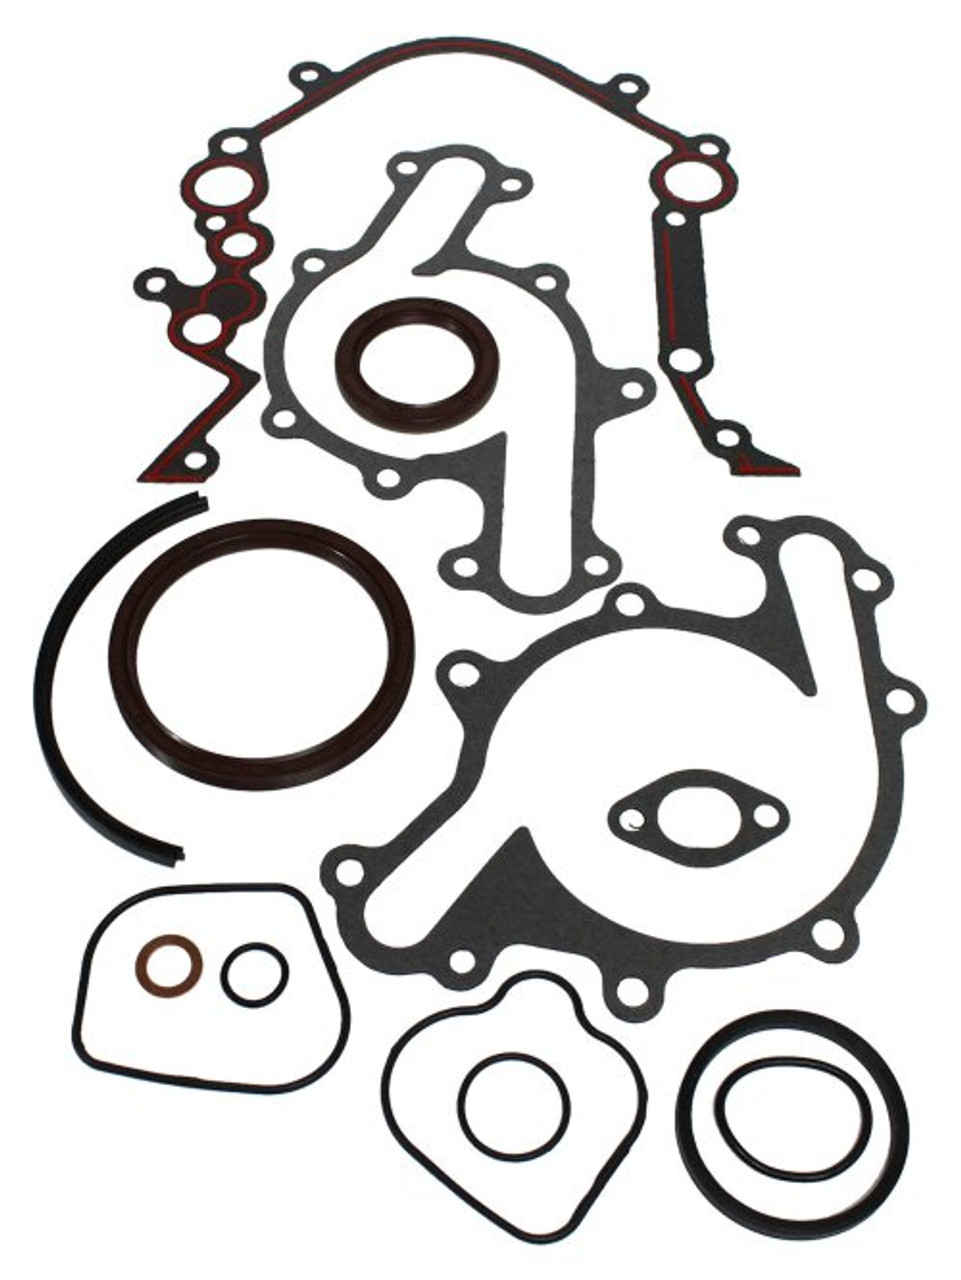 Lower Gasket Set - 1996 Ford Thunderbird 3.8L Engine Parts # LGS4122ZE11